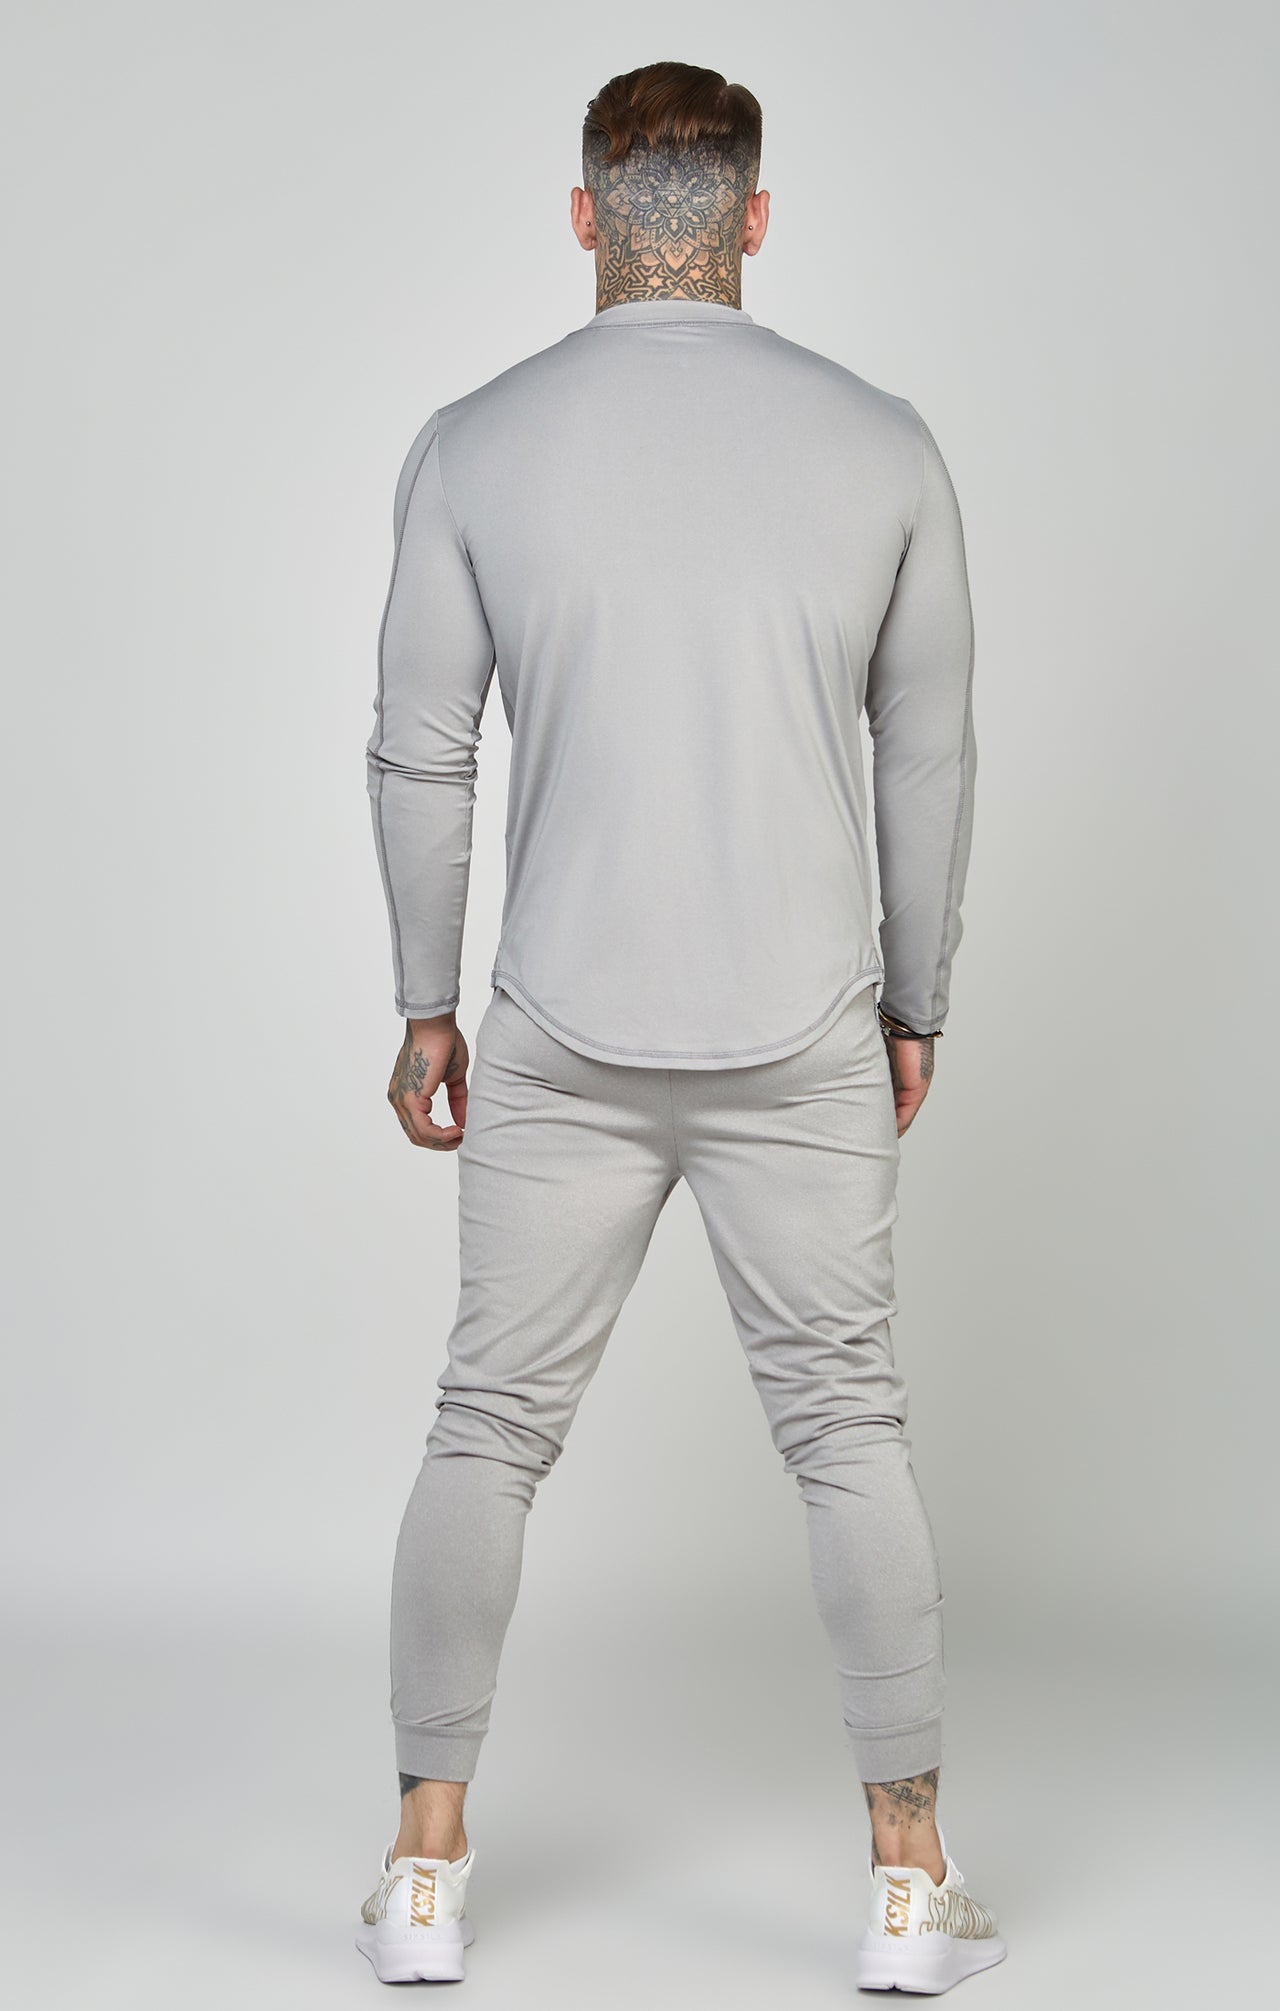 Grey Sports Muscle Fit Long Sleeve Top (4)